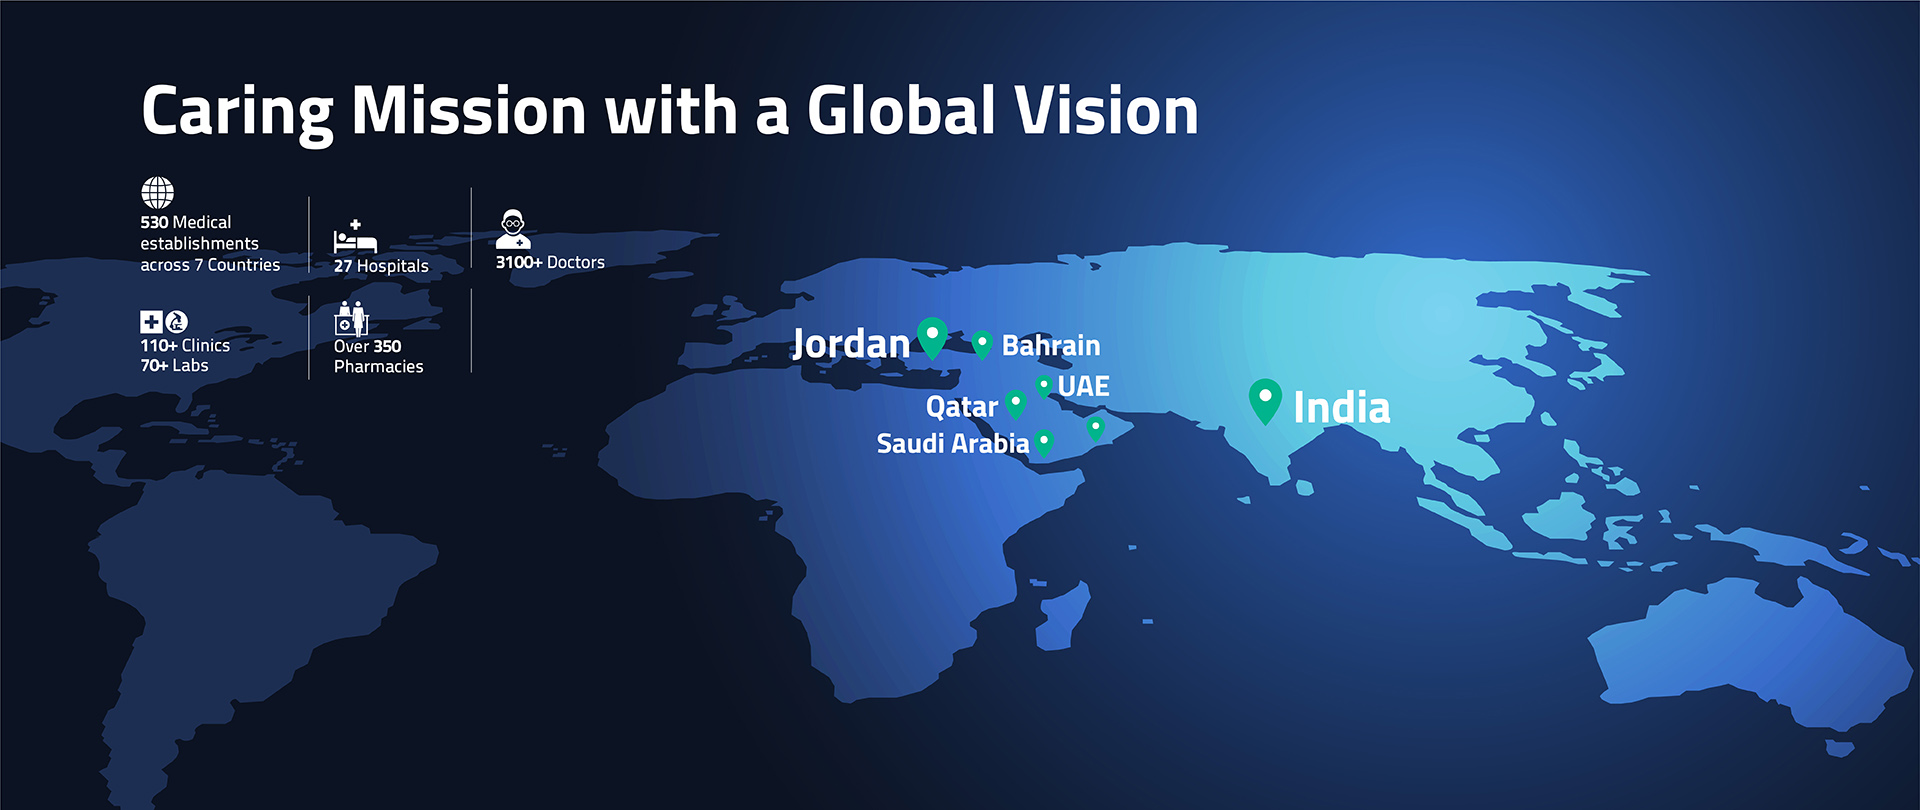 Caring Mission with Global Vision